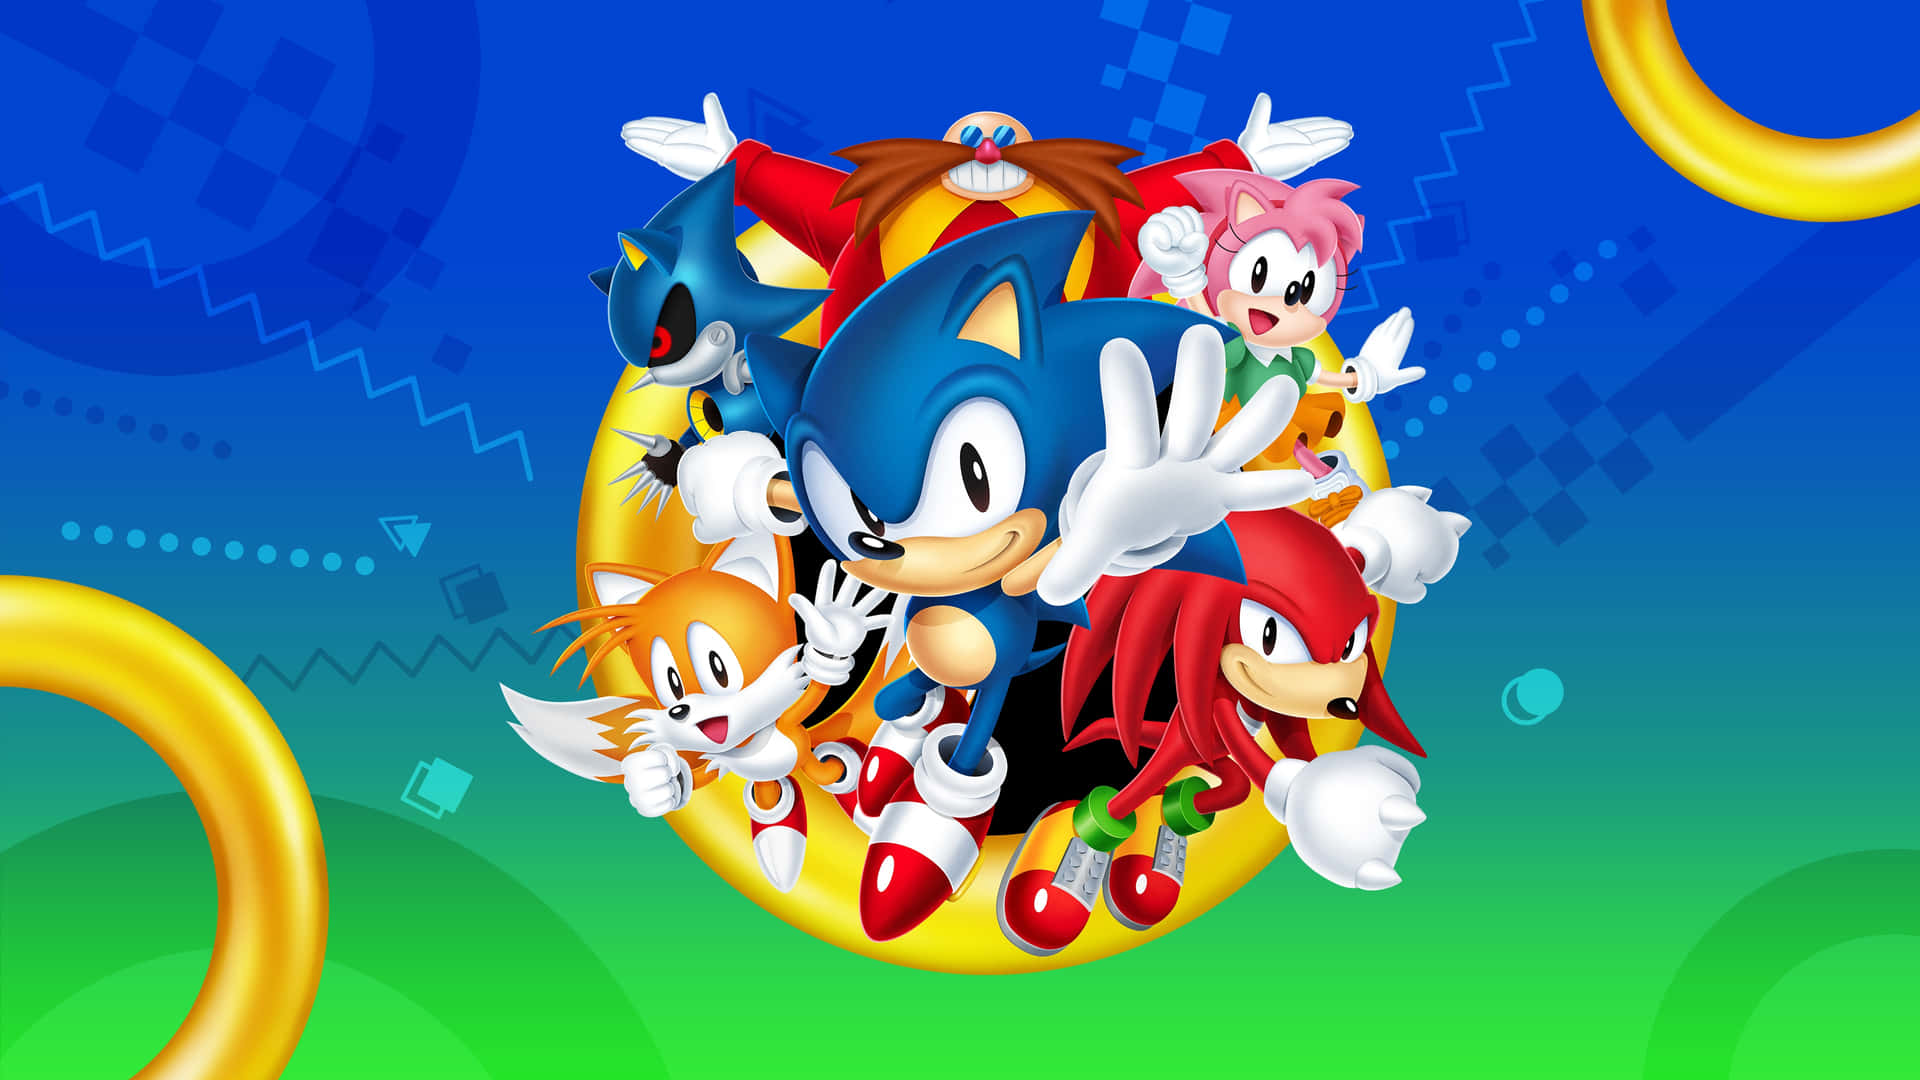 "An epic gathering of Sonic the Hedgehog and his friends." Wallpaper